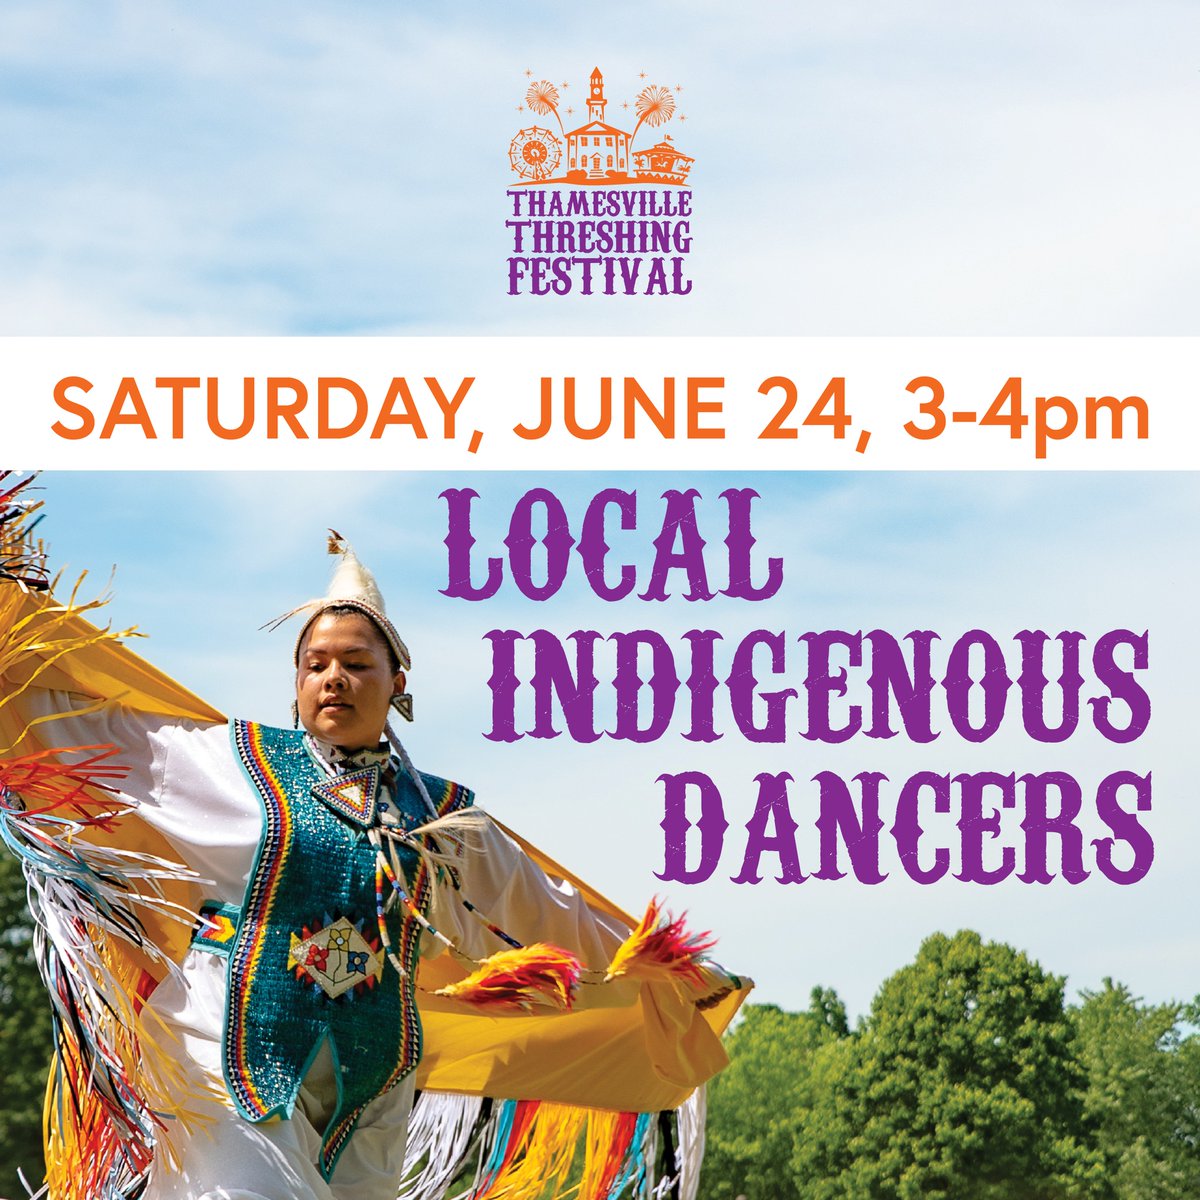 Come out to the Thamesville Threshing Festival on June 24, from 3pm-4pm, to see local Indigenous Dancers drumming, singing, and honouring the traditions of their ancestors

#Tville2023 #YourTVCK#ThamesvilleON #ThreshingFestival #CKont #TrulyLocal